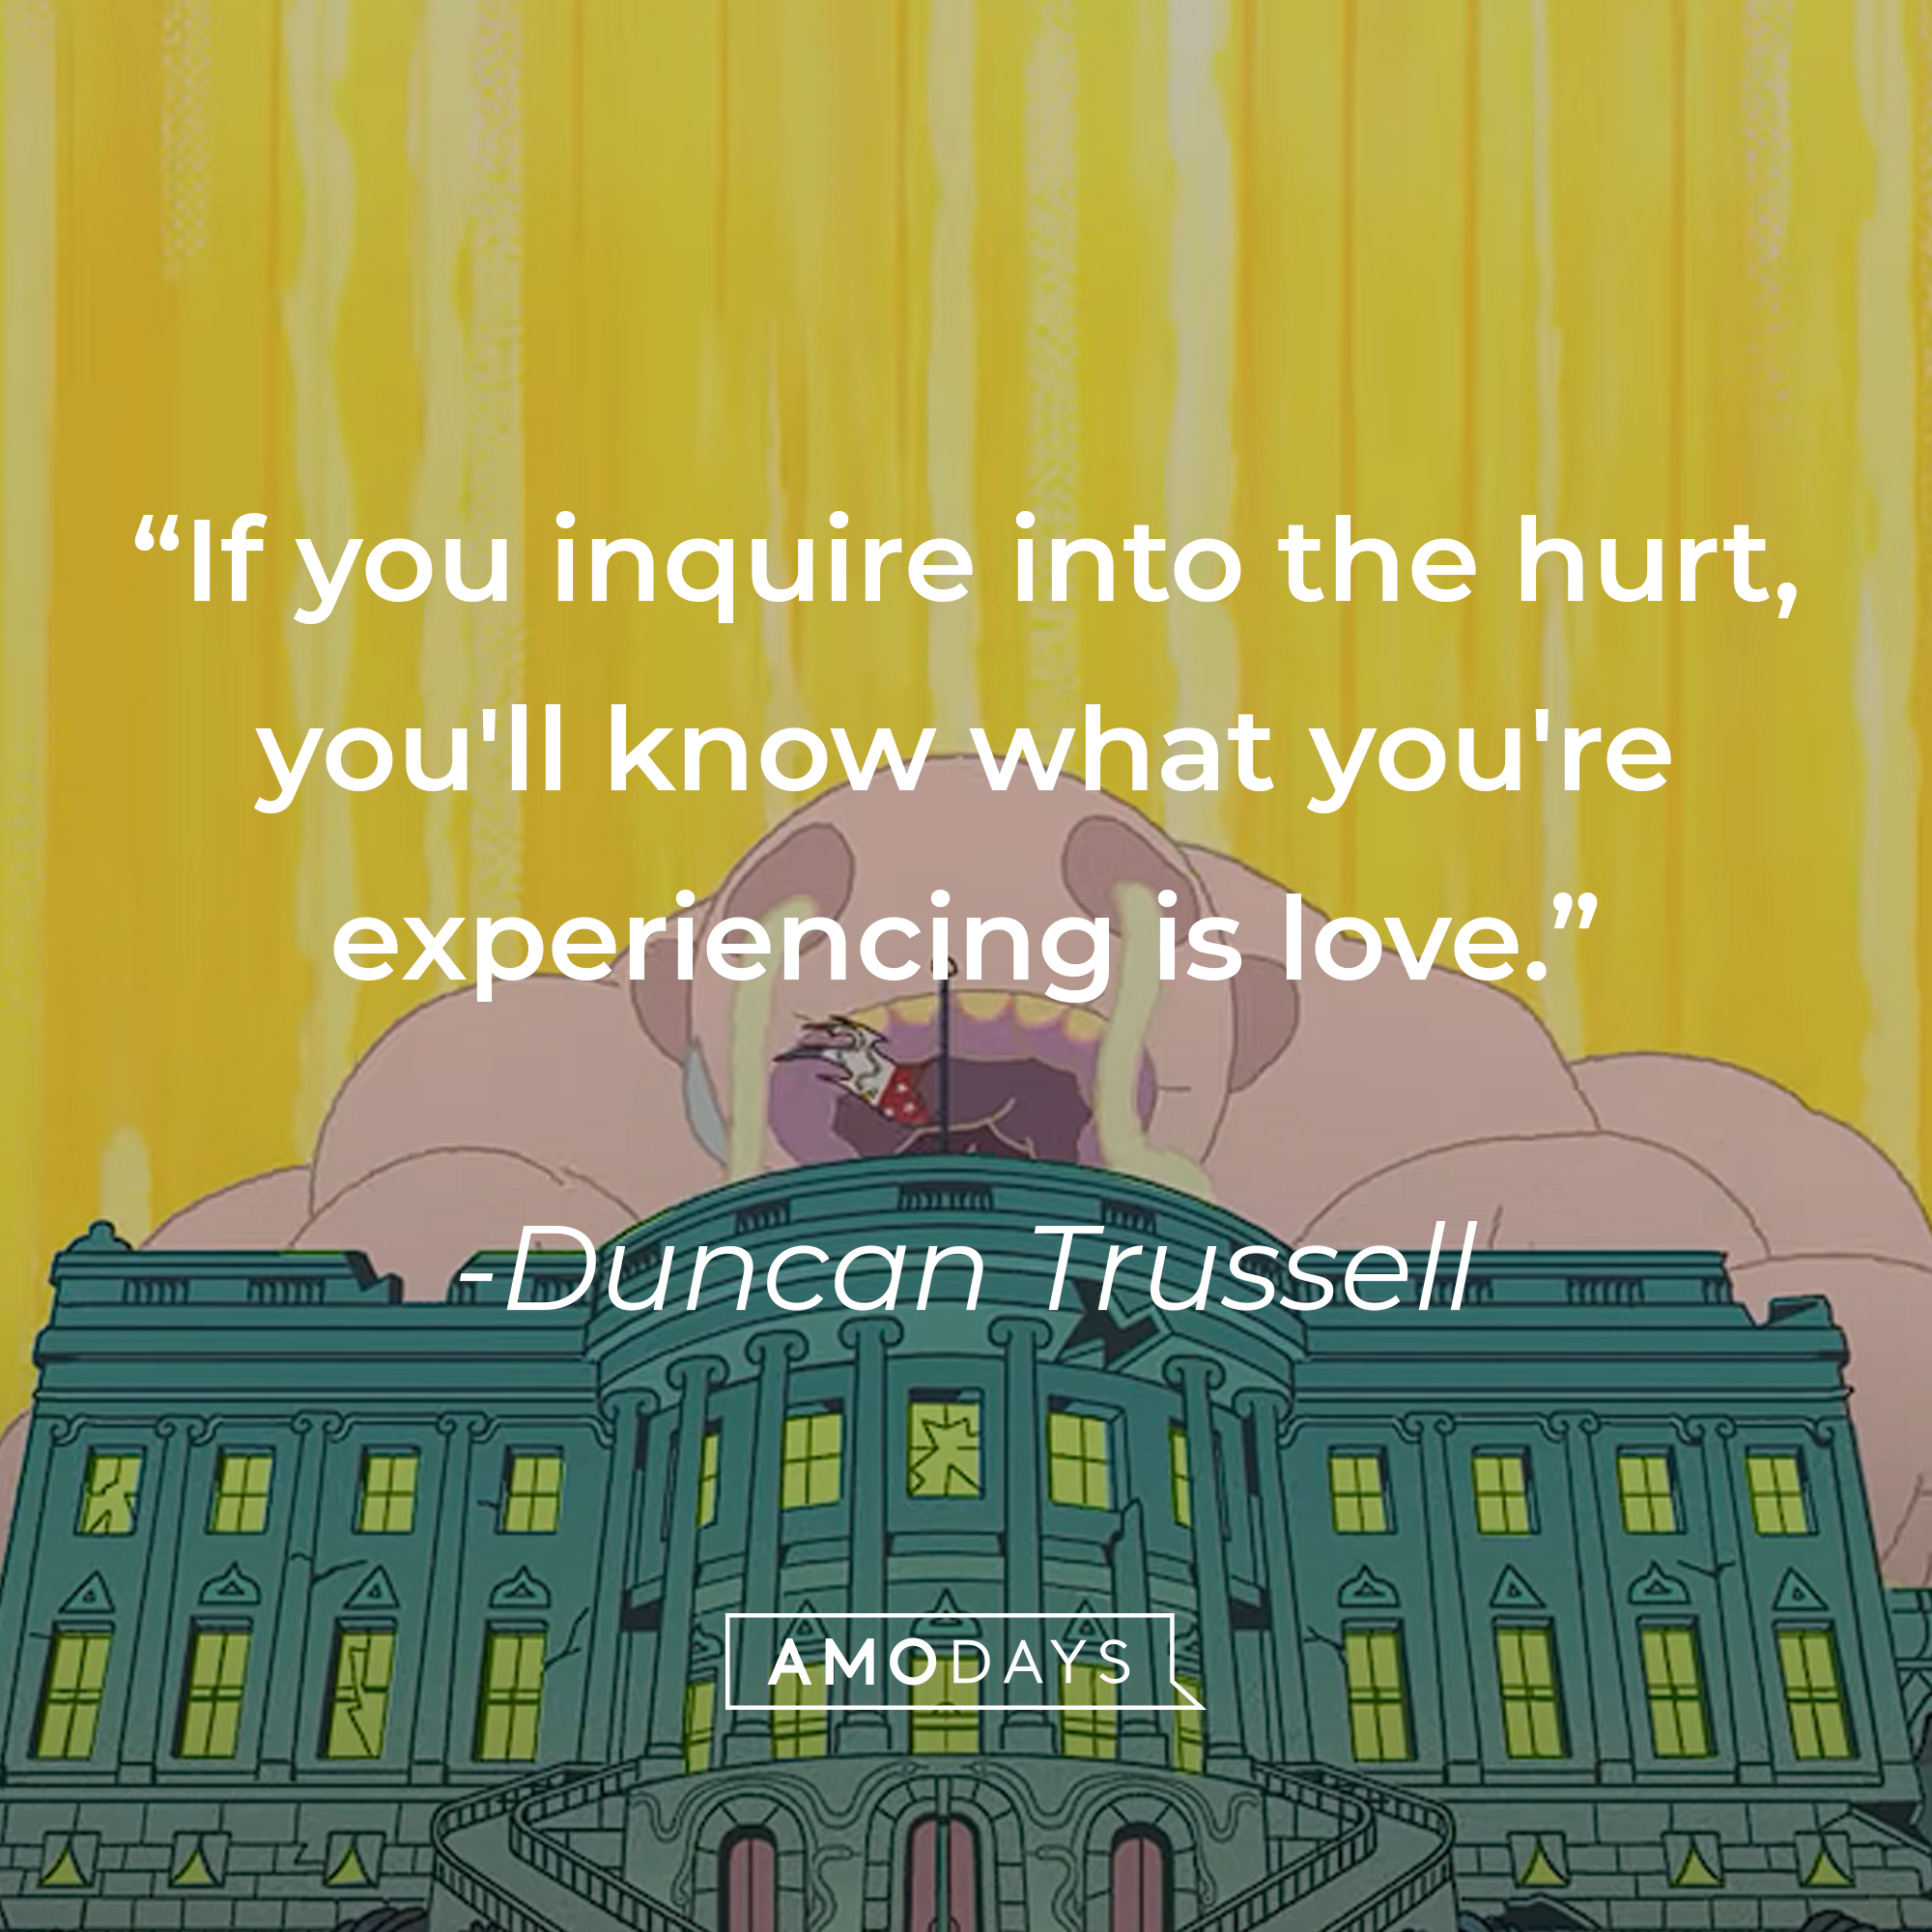 Duncan Trussell's quote: "If you inquire into the hurt, you'll know what you're experiencing is love." | Source: youtube.com/Netflix